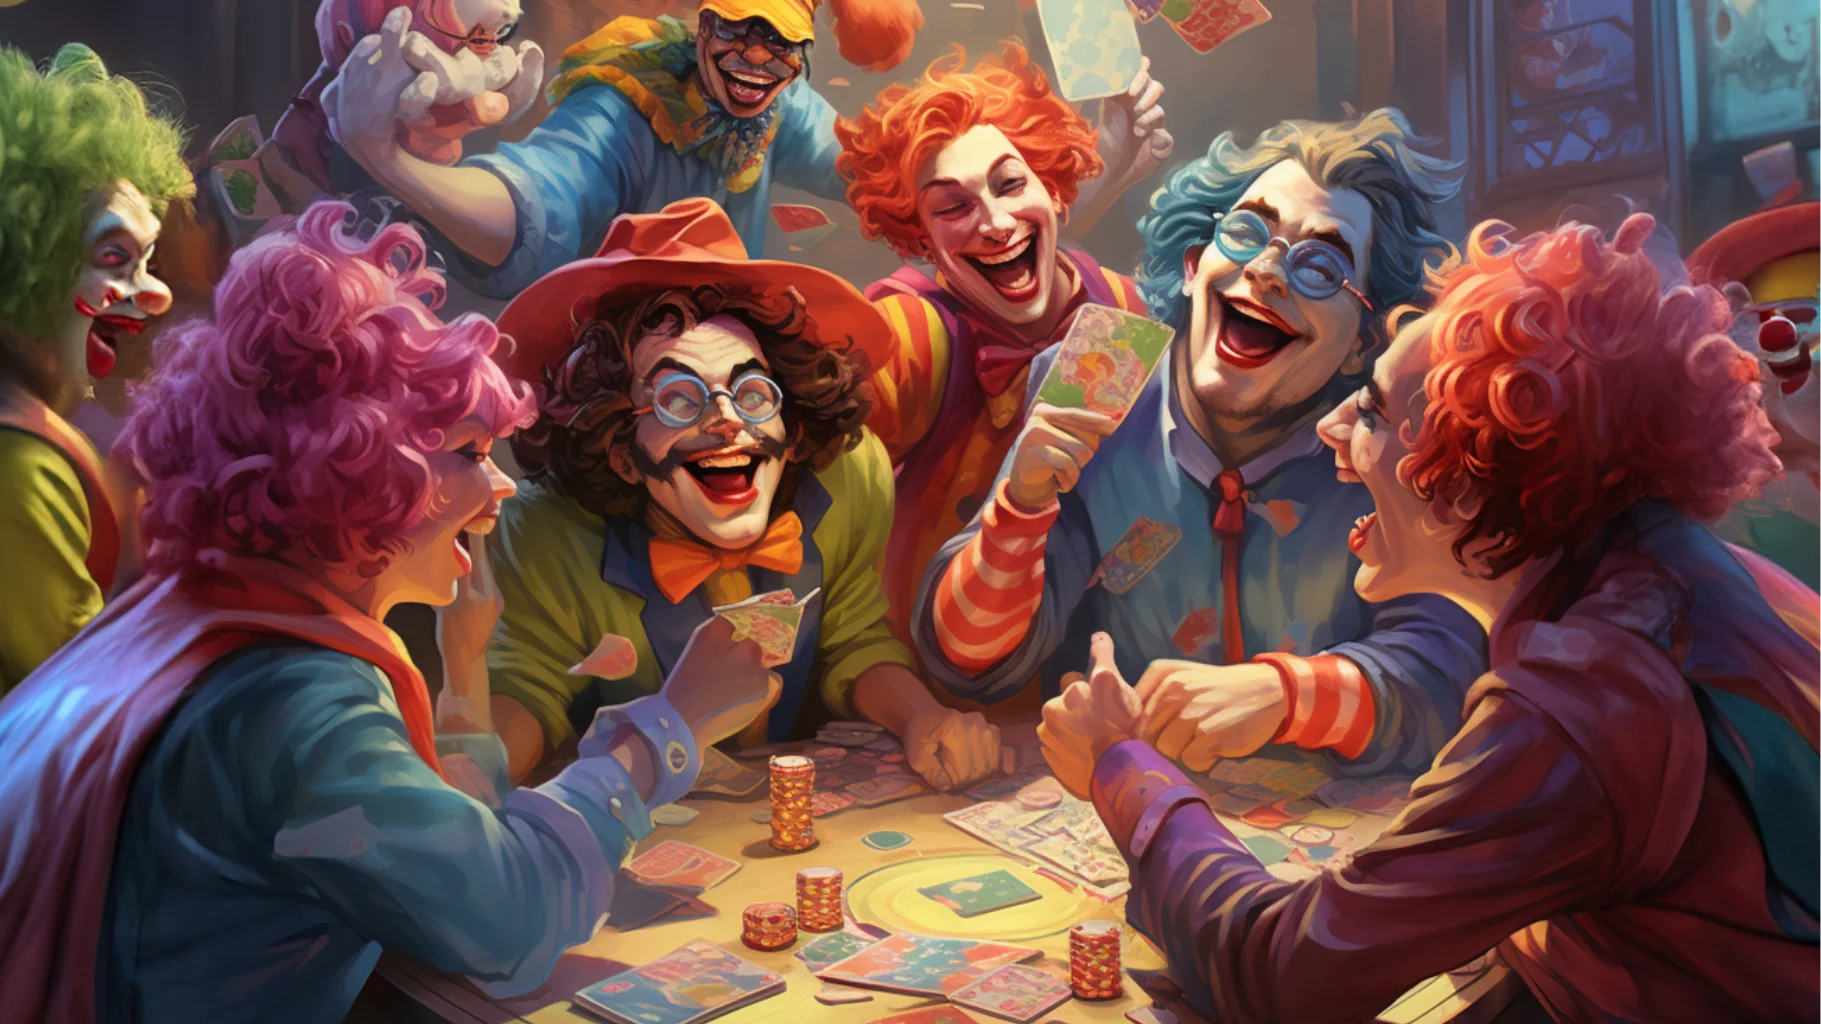 Clowns playing board games